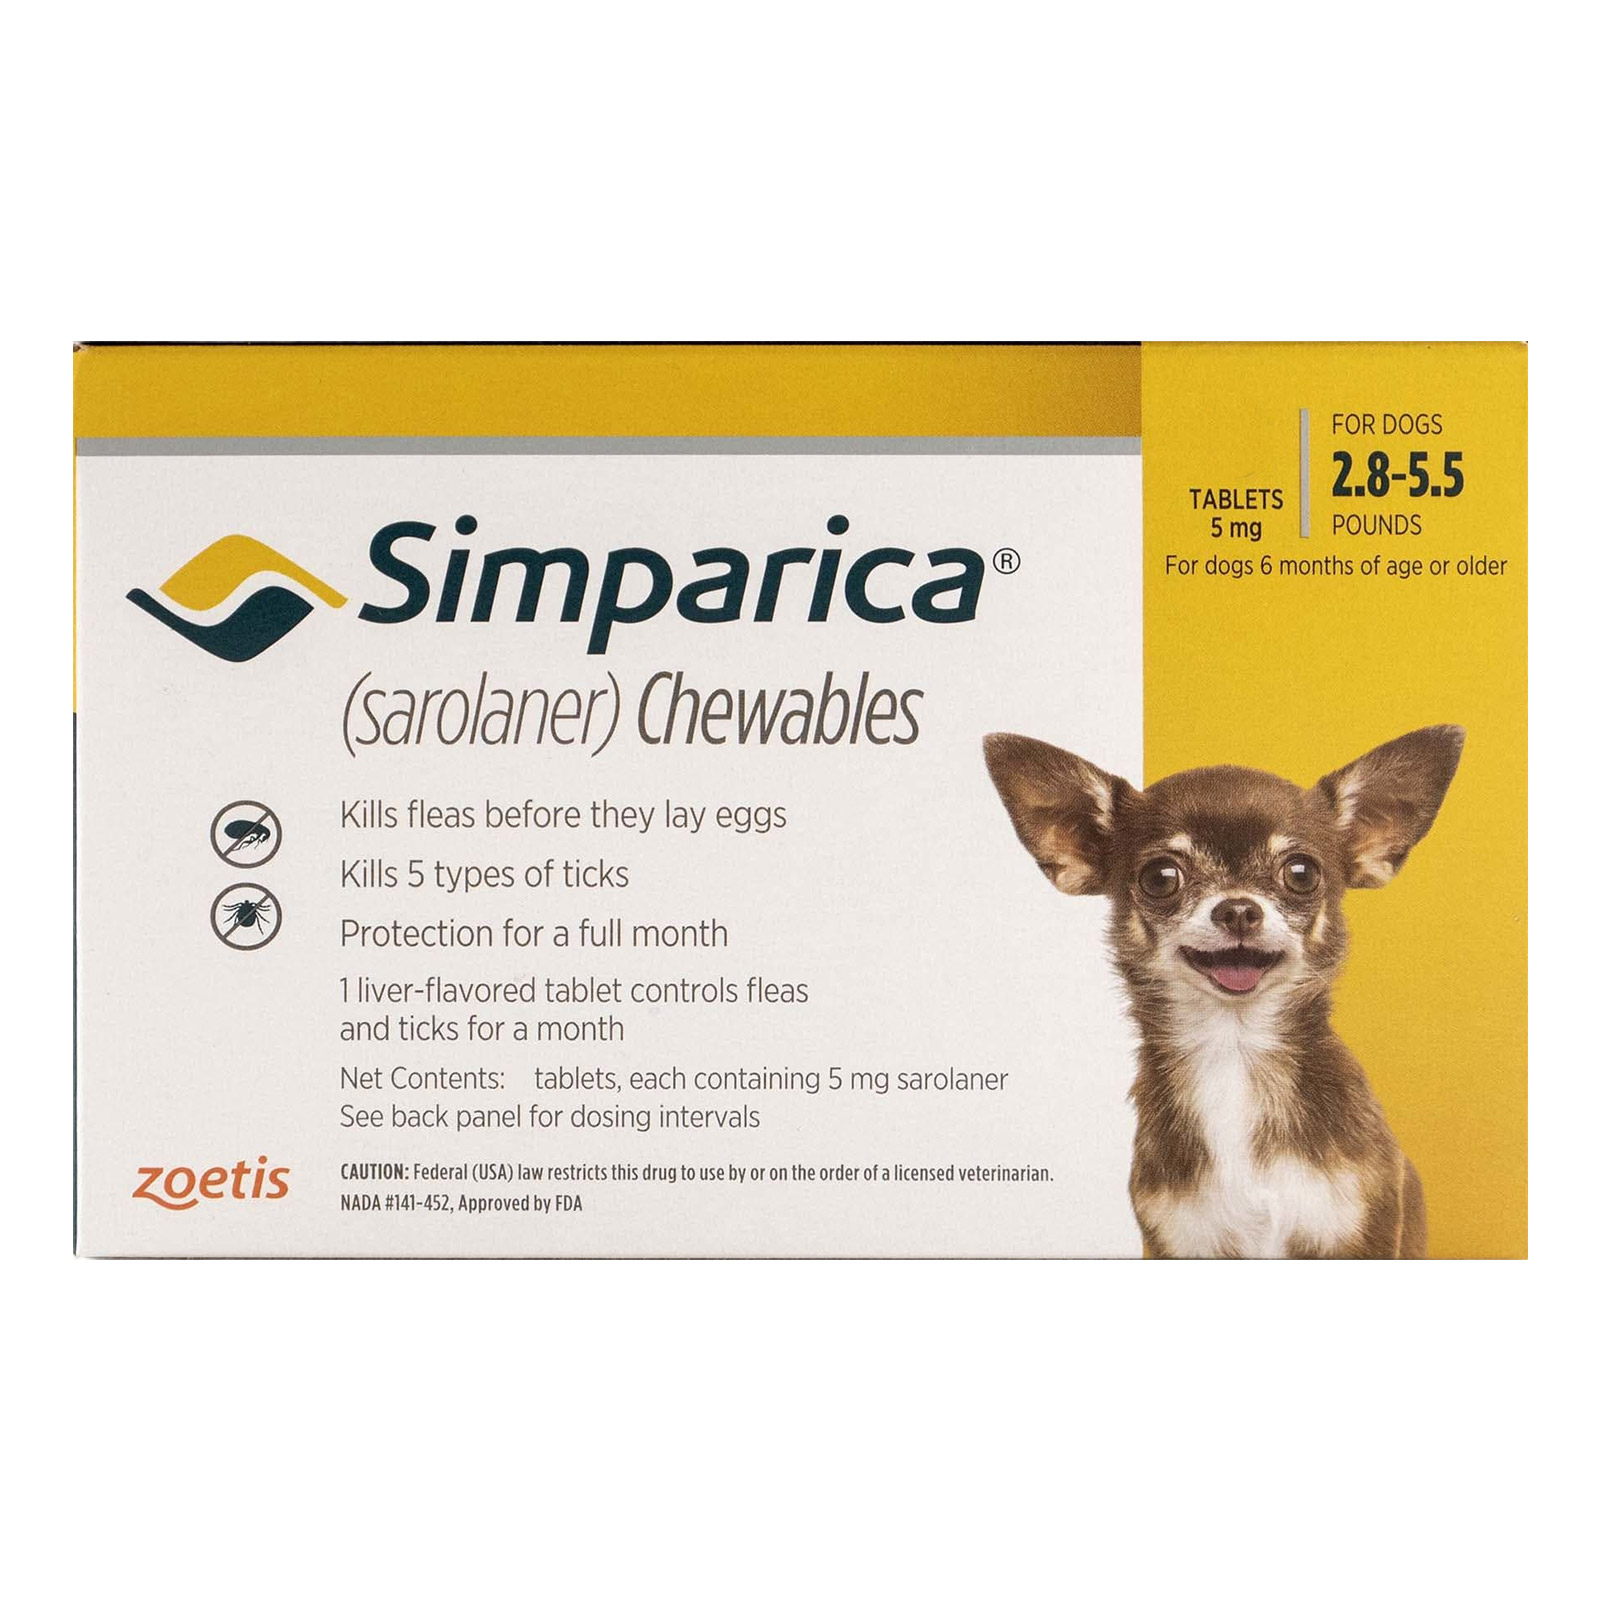 Simparica Chewables For Dogs 2.8-5.5 Lbs Yellow 6 Doses